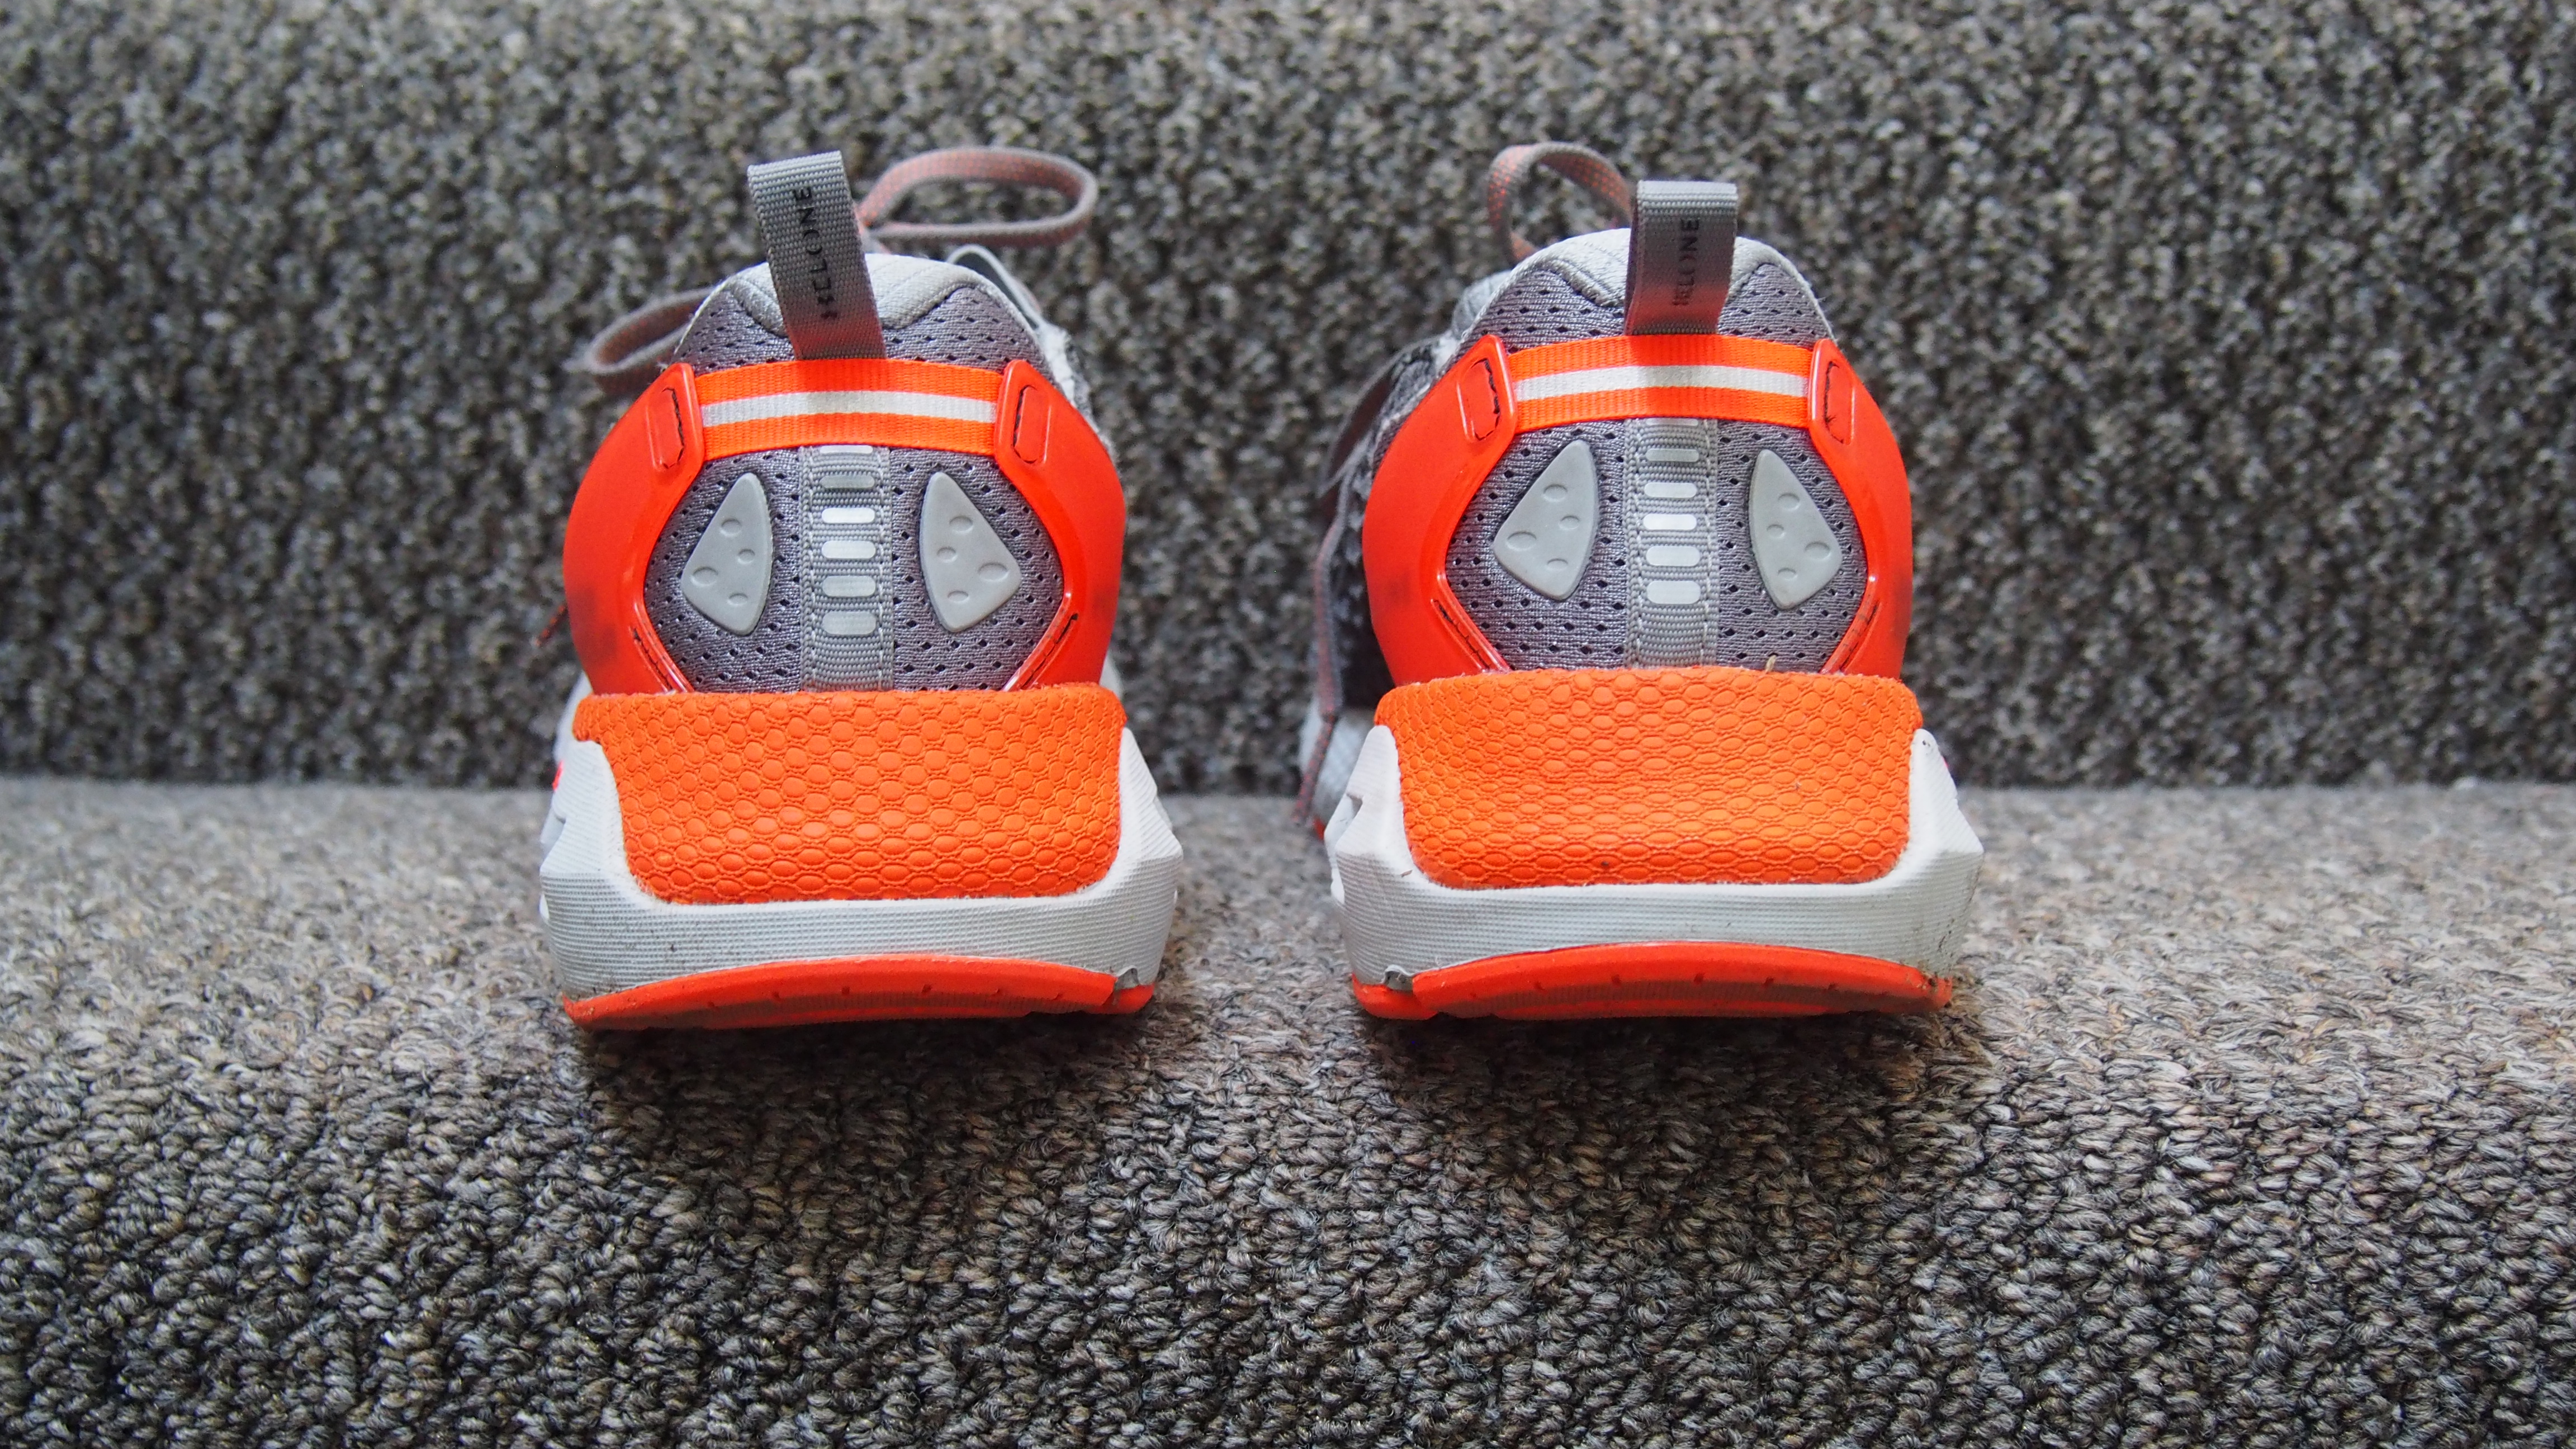 Under Armour HOVR Mega 2 Clone rear view, showing carbon rubber outsole